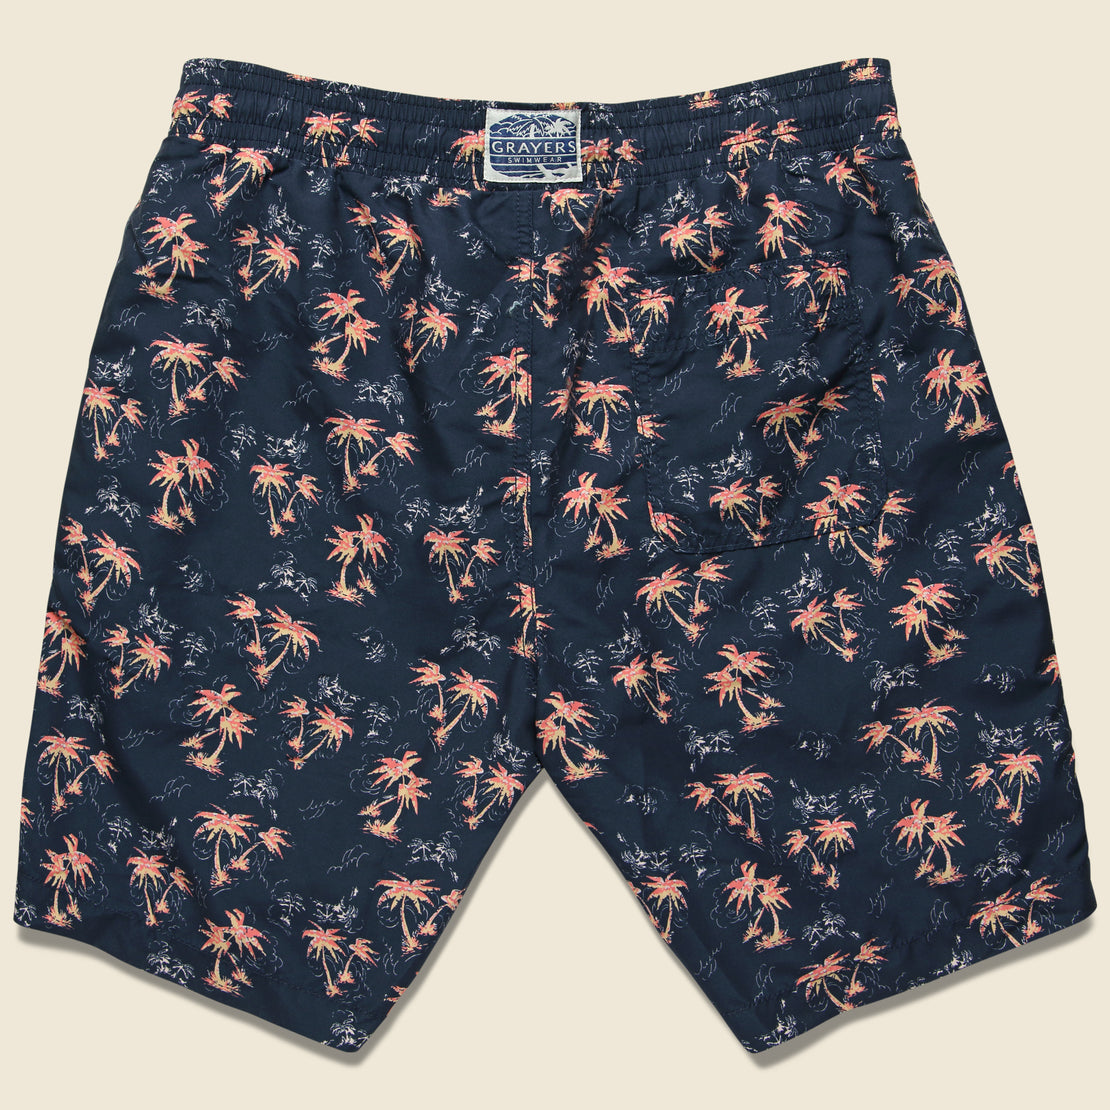 Burning Palm Swim Trunk - Carbon Spice Coral - Grayers - STAG Provisions - Shorts - Swim